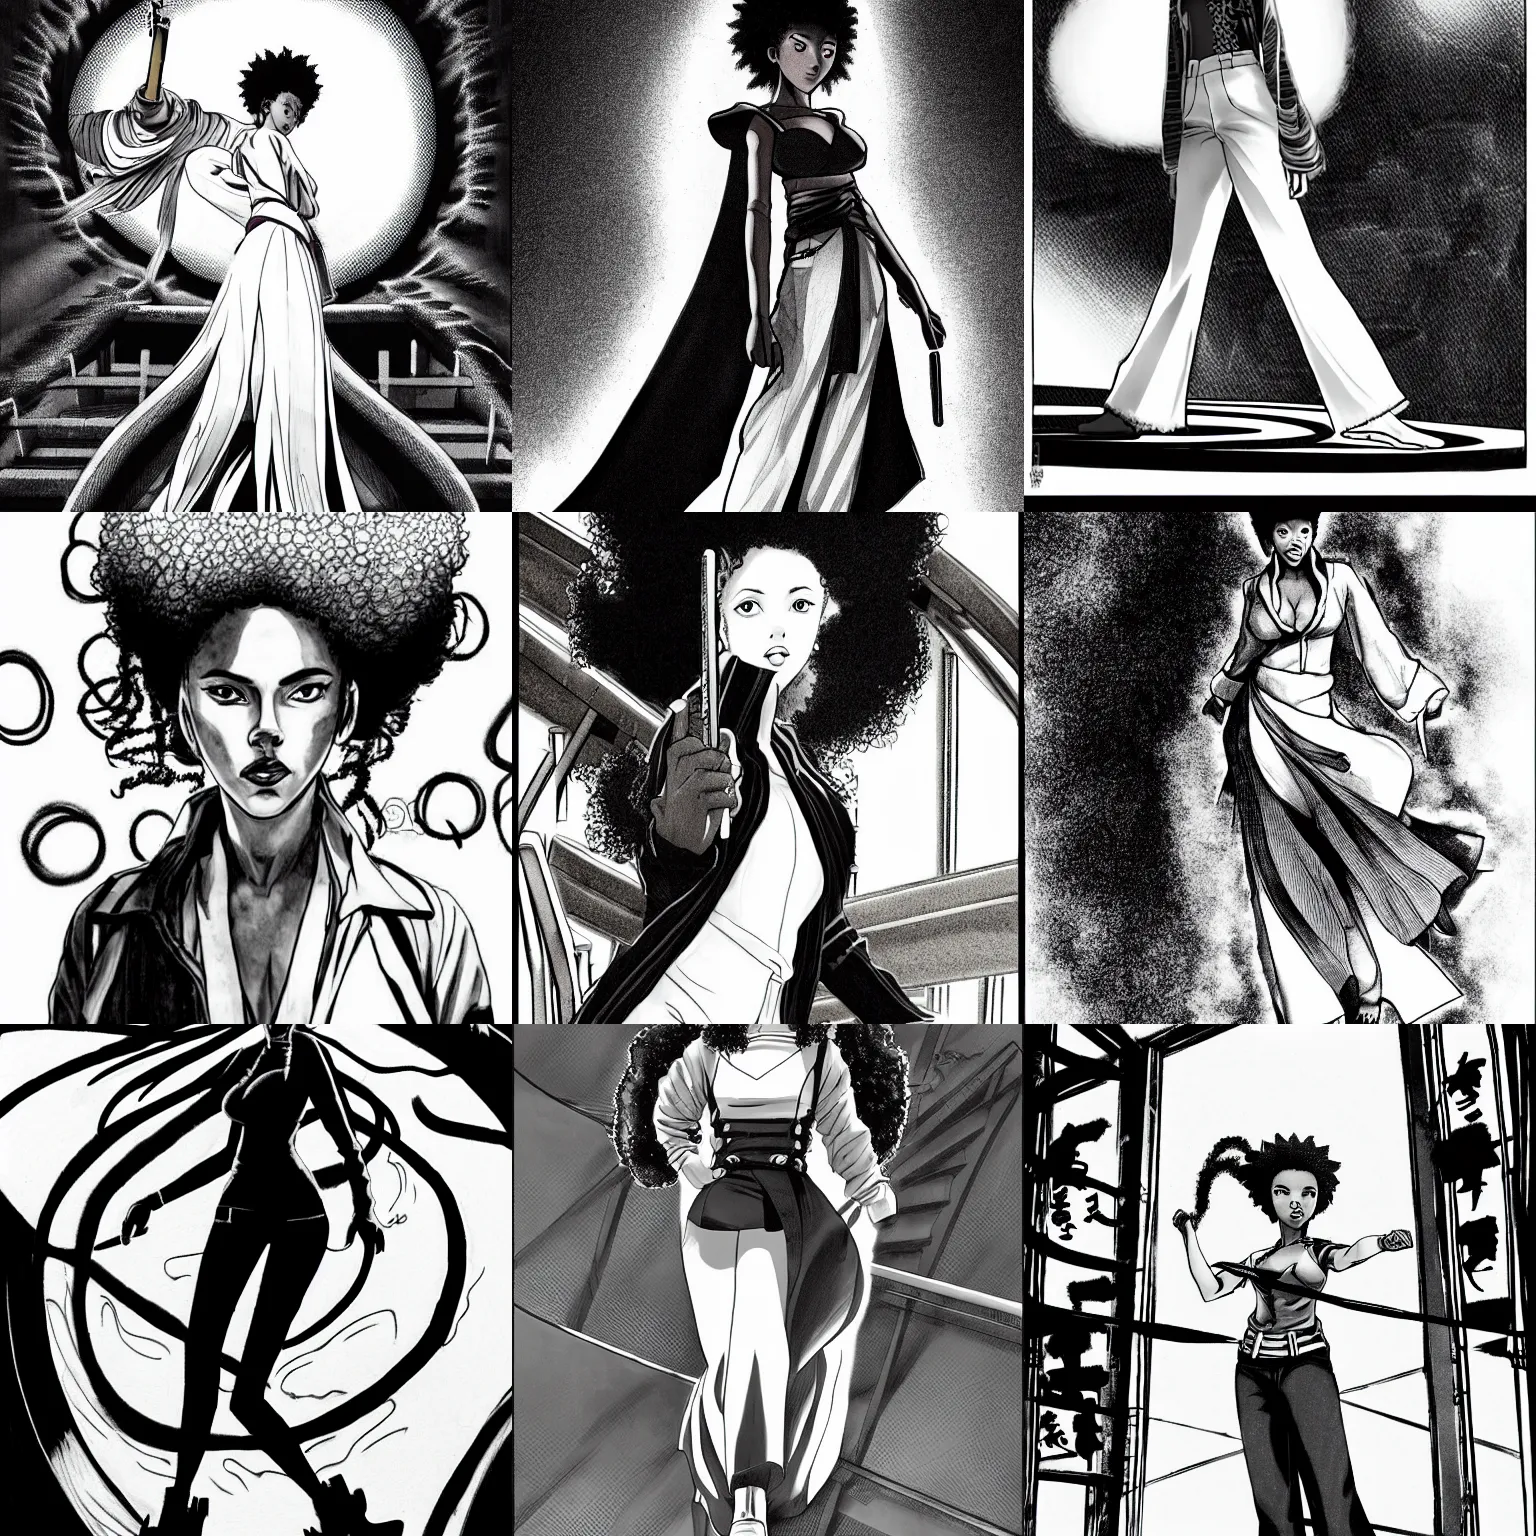 Prompt: scarlett johansson afro samurai anime style, wearing 1 9 7 0 s bellbottoms clothing, black and white, full body profile, walking up infinite spiral staircase, dramatic lighting, pencil and ink